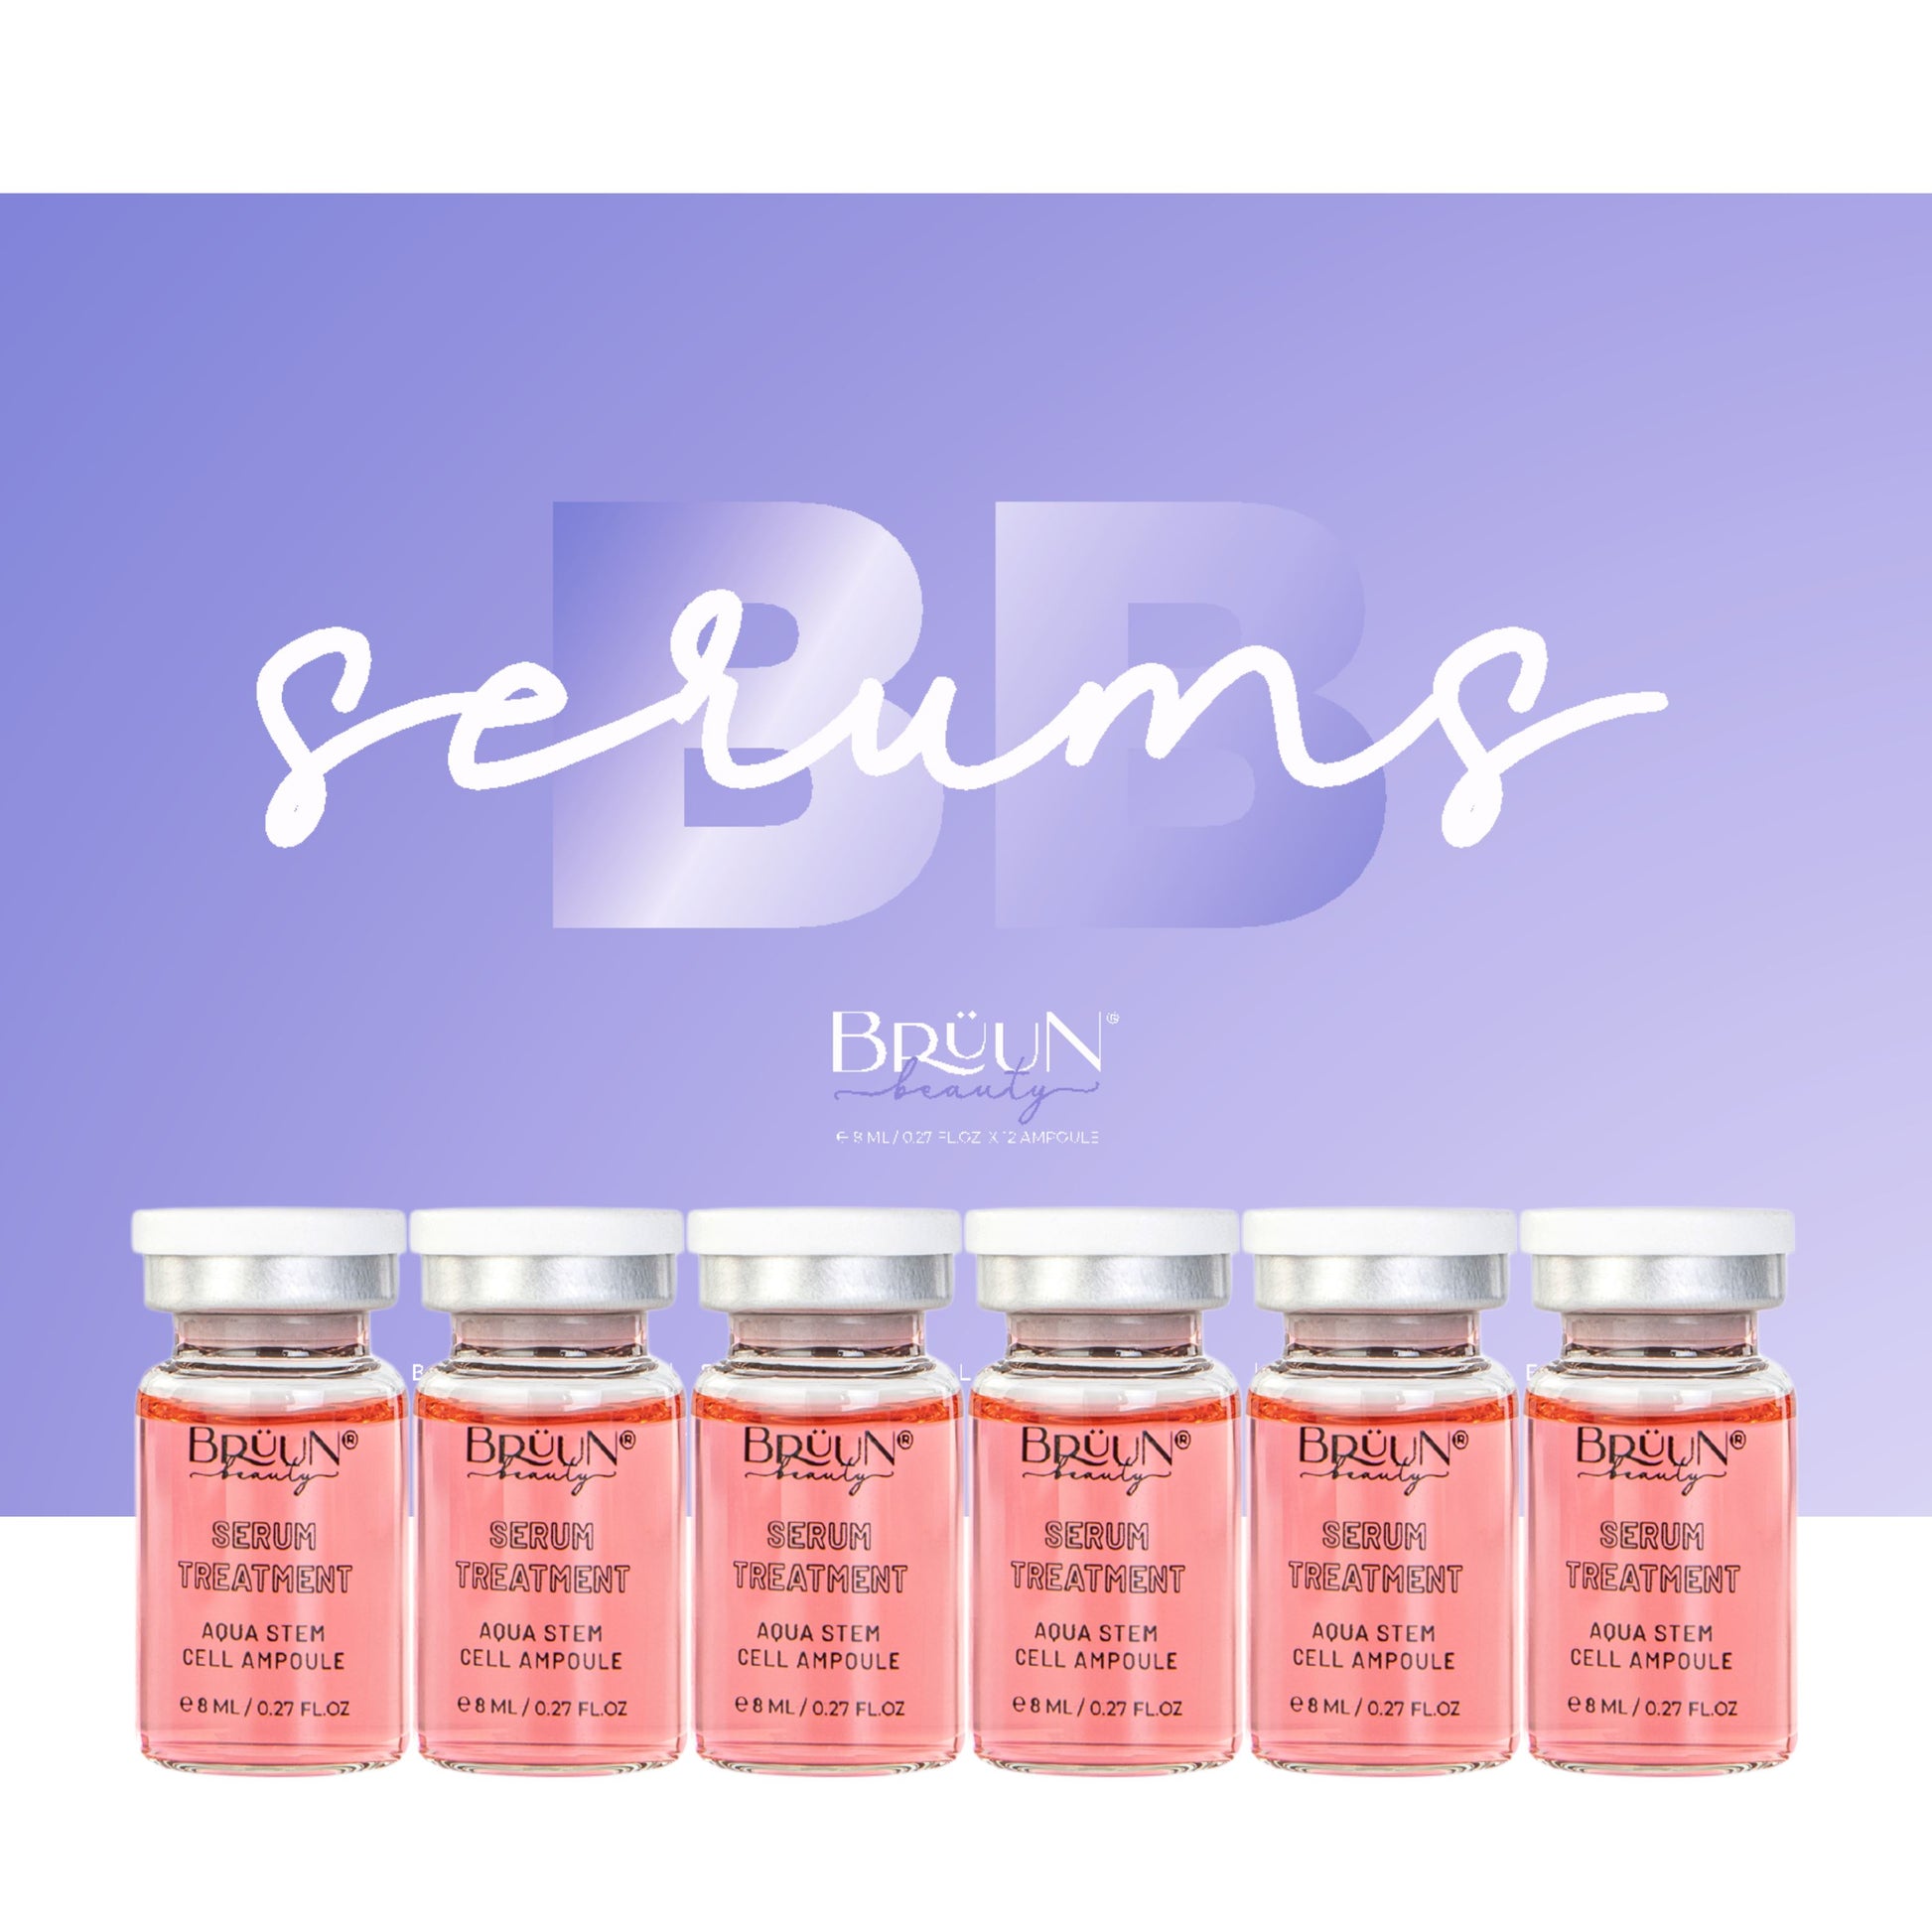 BB Serum Ampule – A (Pack of 6) Aqua Stem cell Ampoule for Moisturizing Dry skin Bruun Beauty 